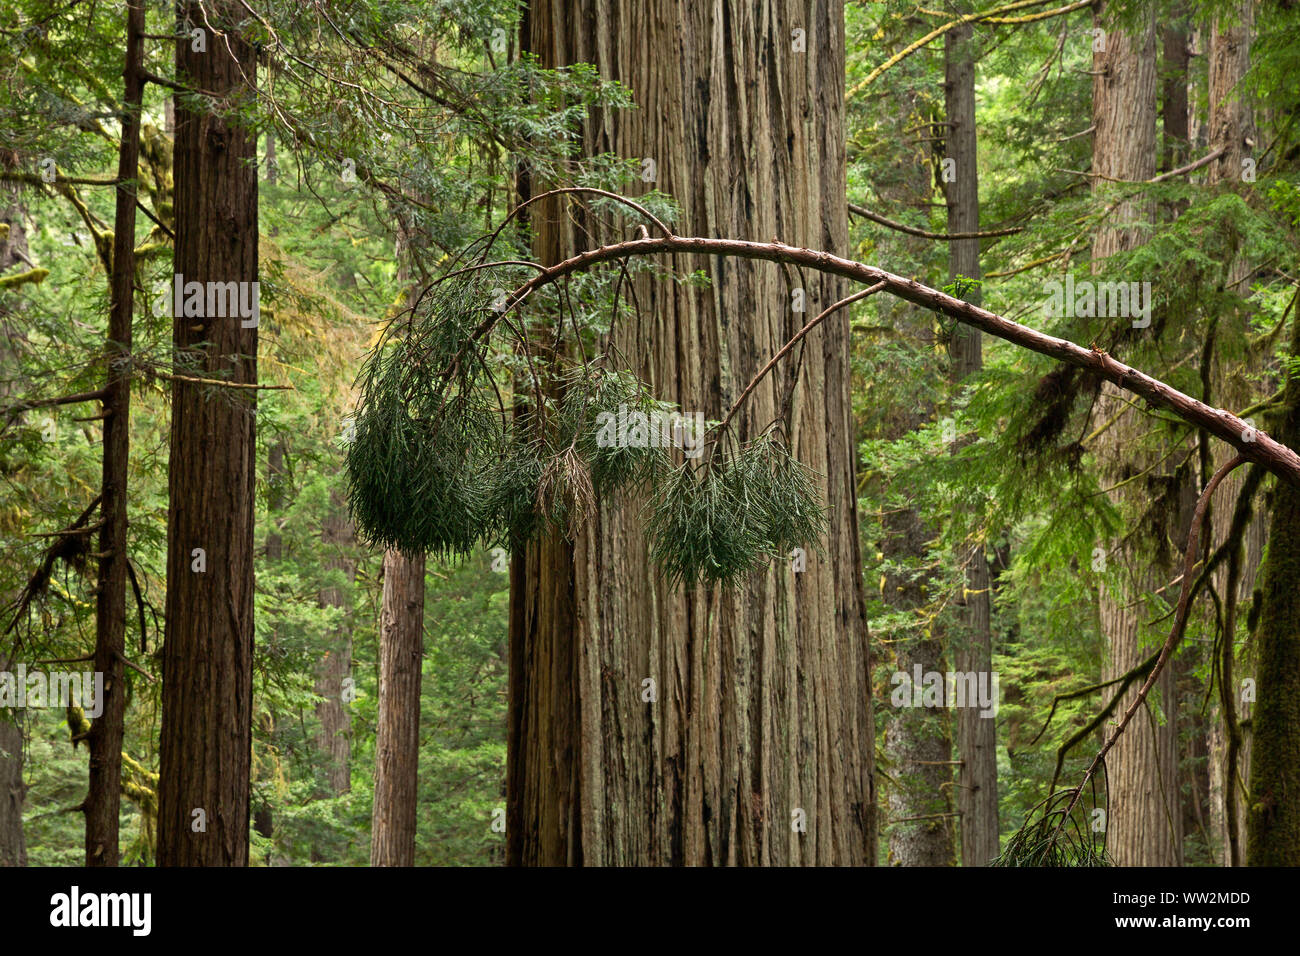 CA03559-00...CALIFORNIA - A skiny and spindly, bent young redwood tree in the Murrelet State Wilderness area of the Prairie Creek Redwoods State Park. Stock Photo